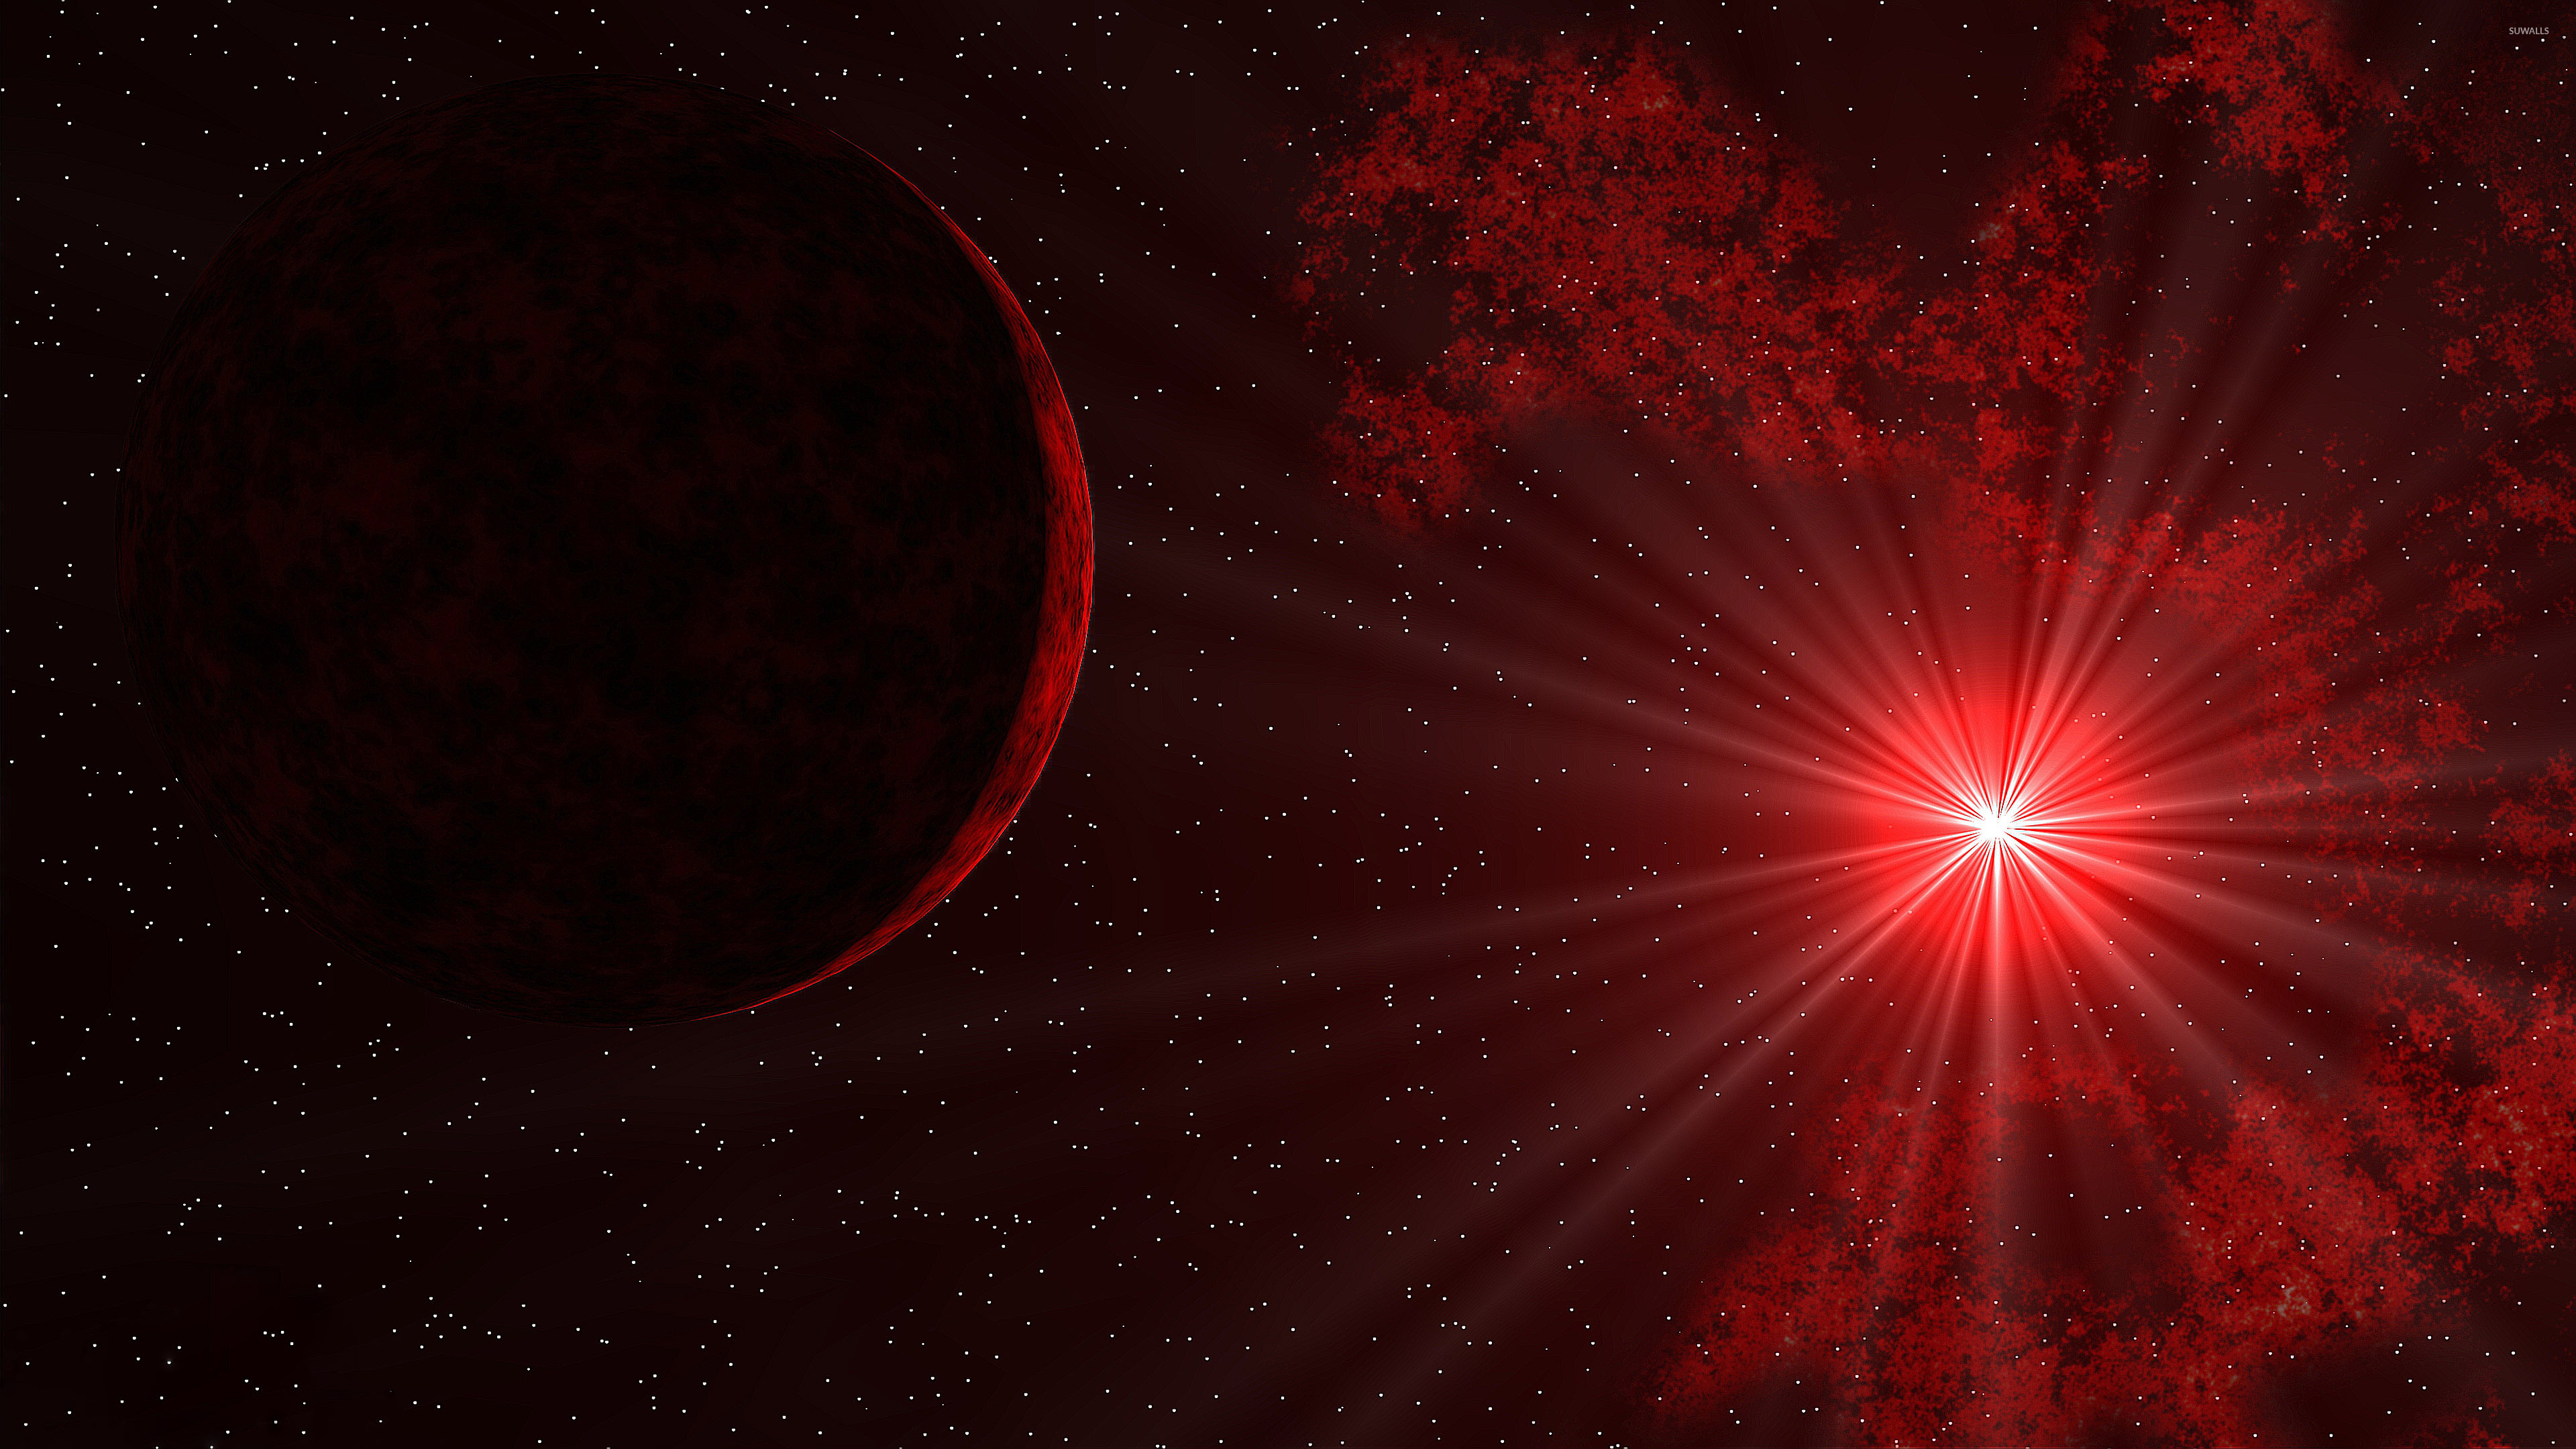 Sunlight through red  space  wallpaper Space  wallpapers 